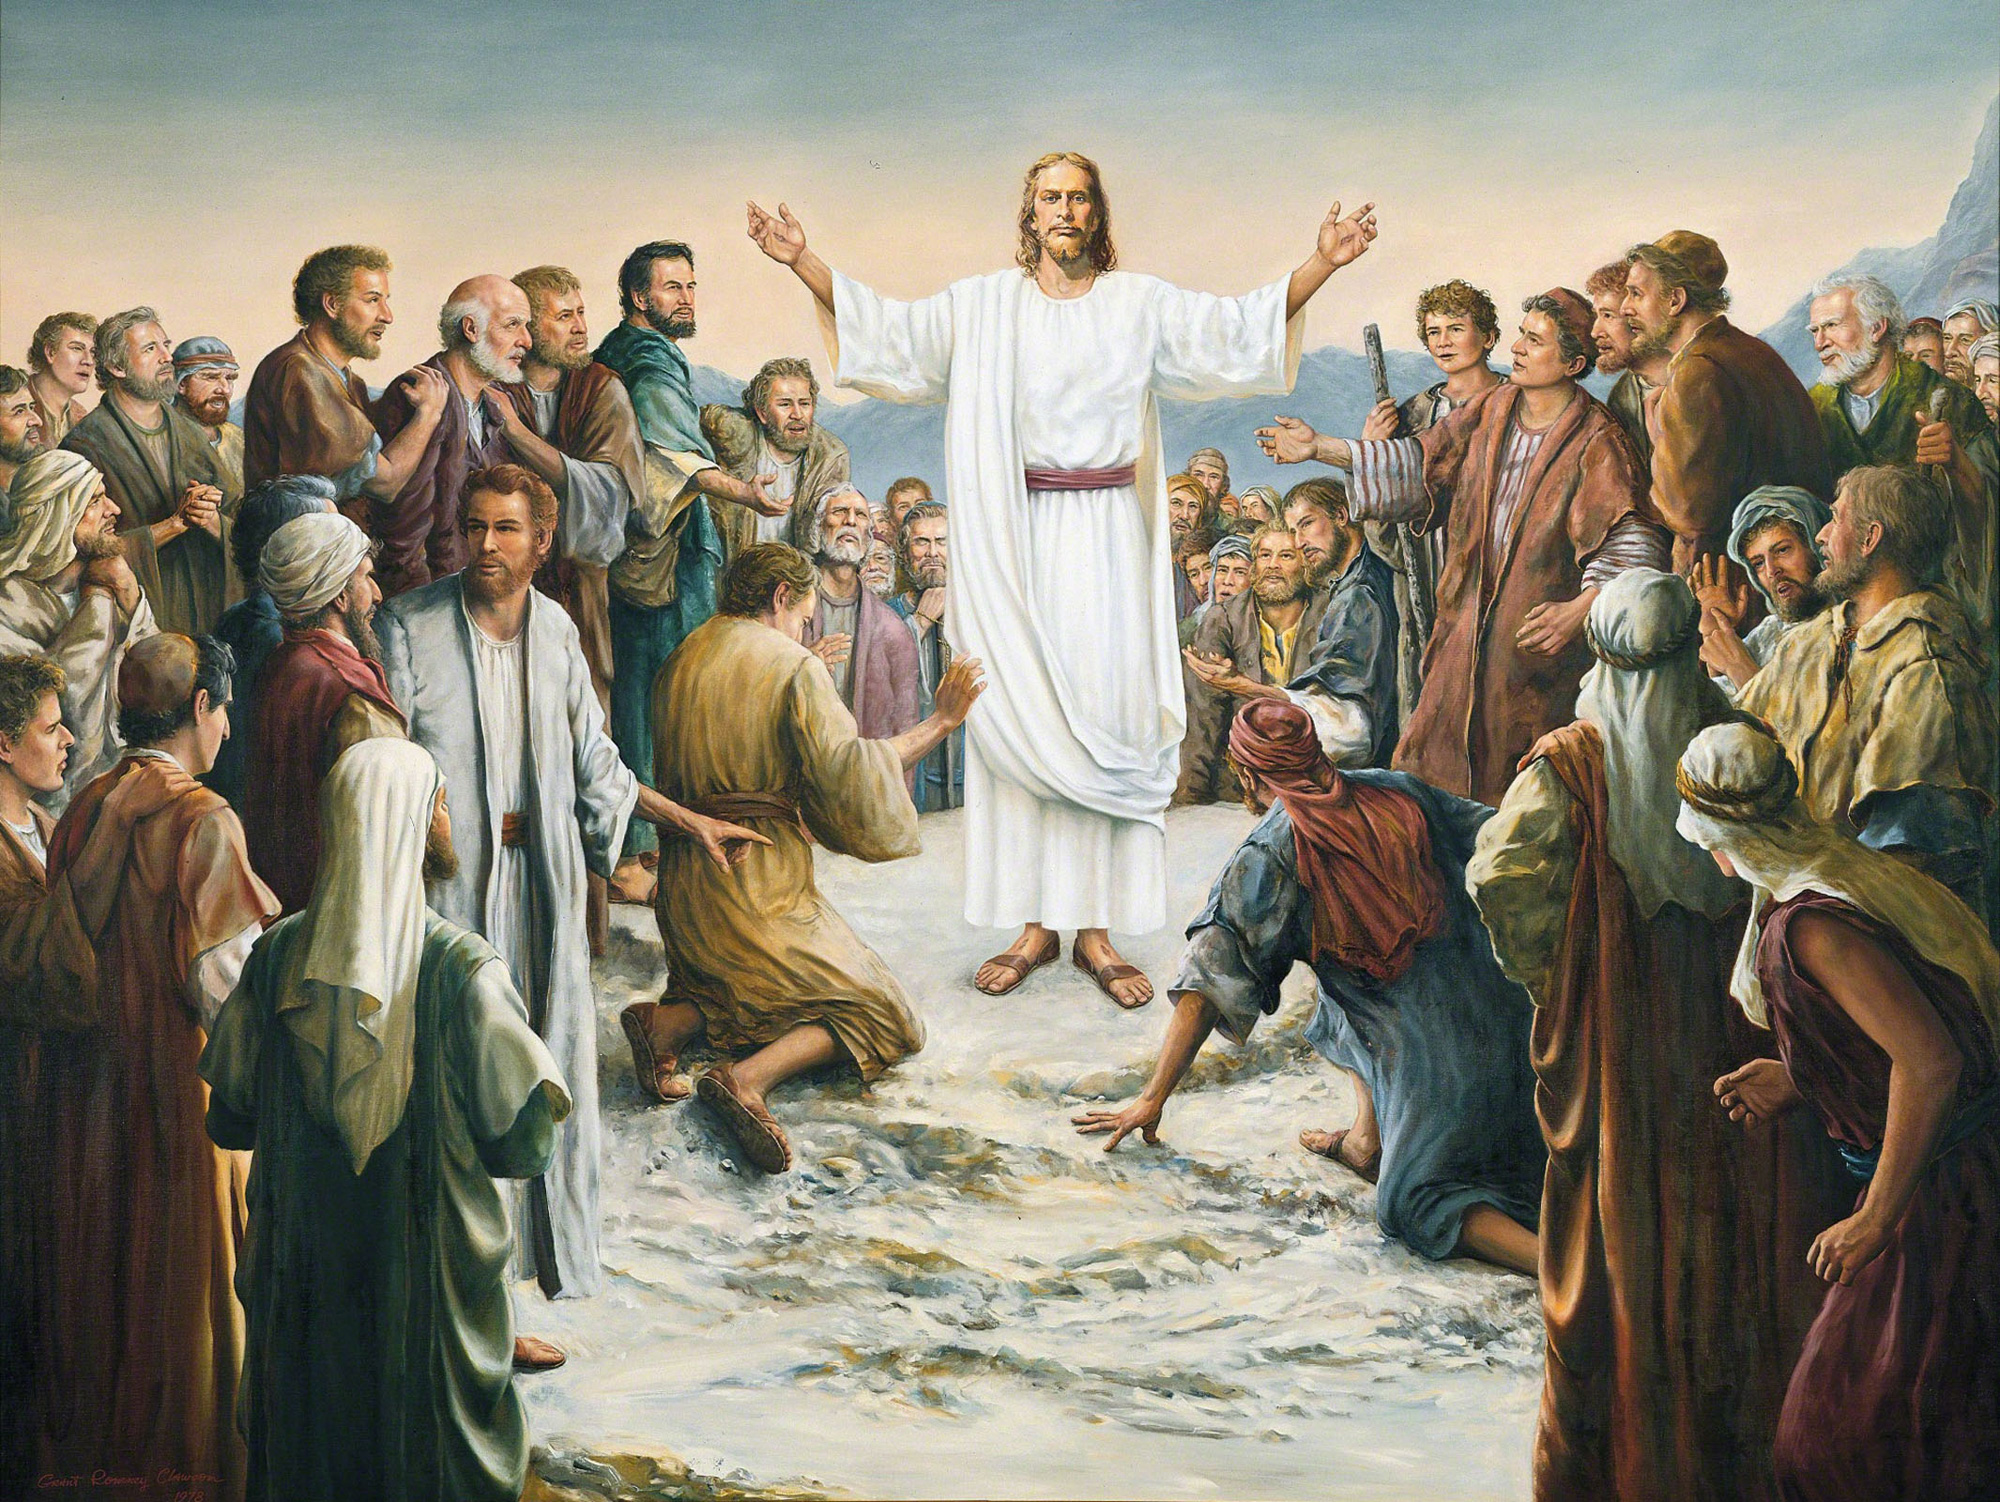 Jesus stands on a rock in the middle of a large group of people. He wears a white robe, red sash and white shoulder sash. The people are in various attitudes of speaking to one another and worshipping him